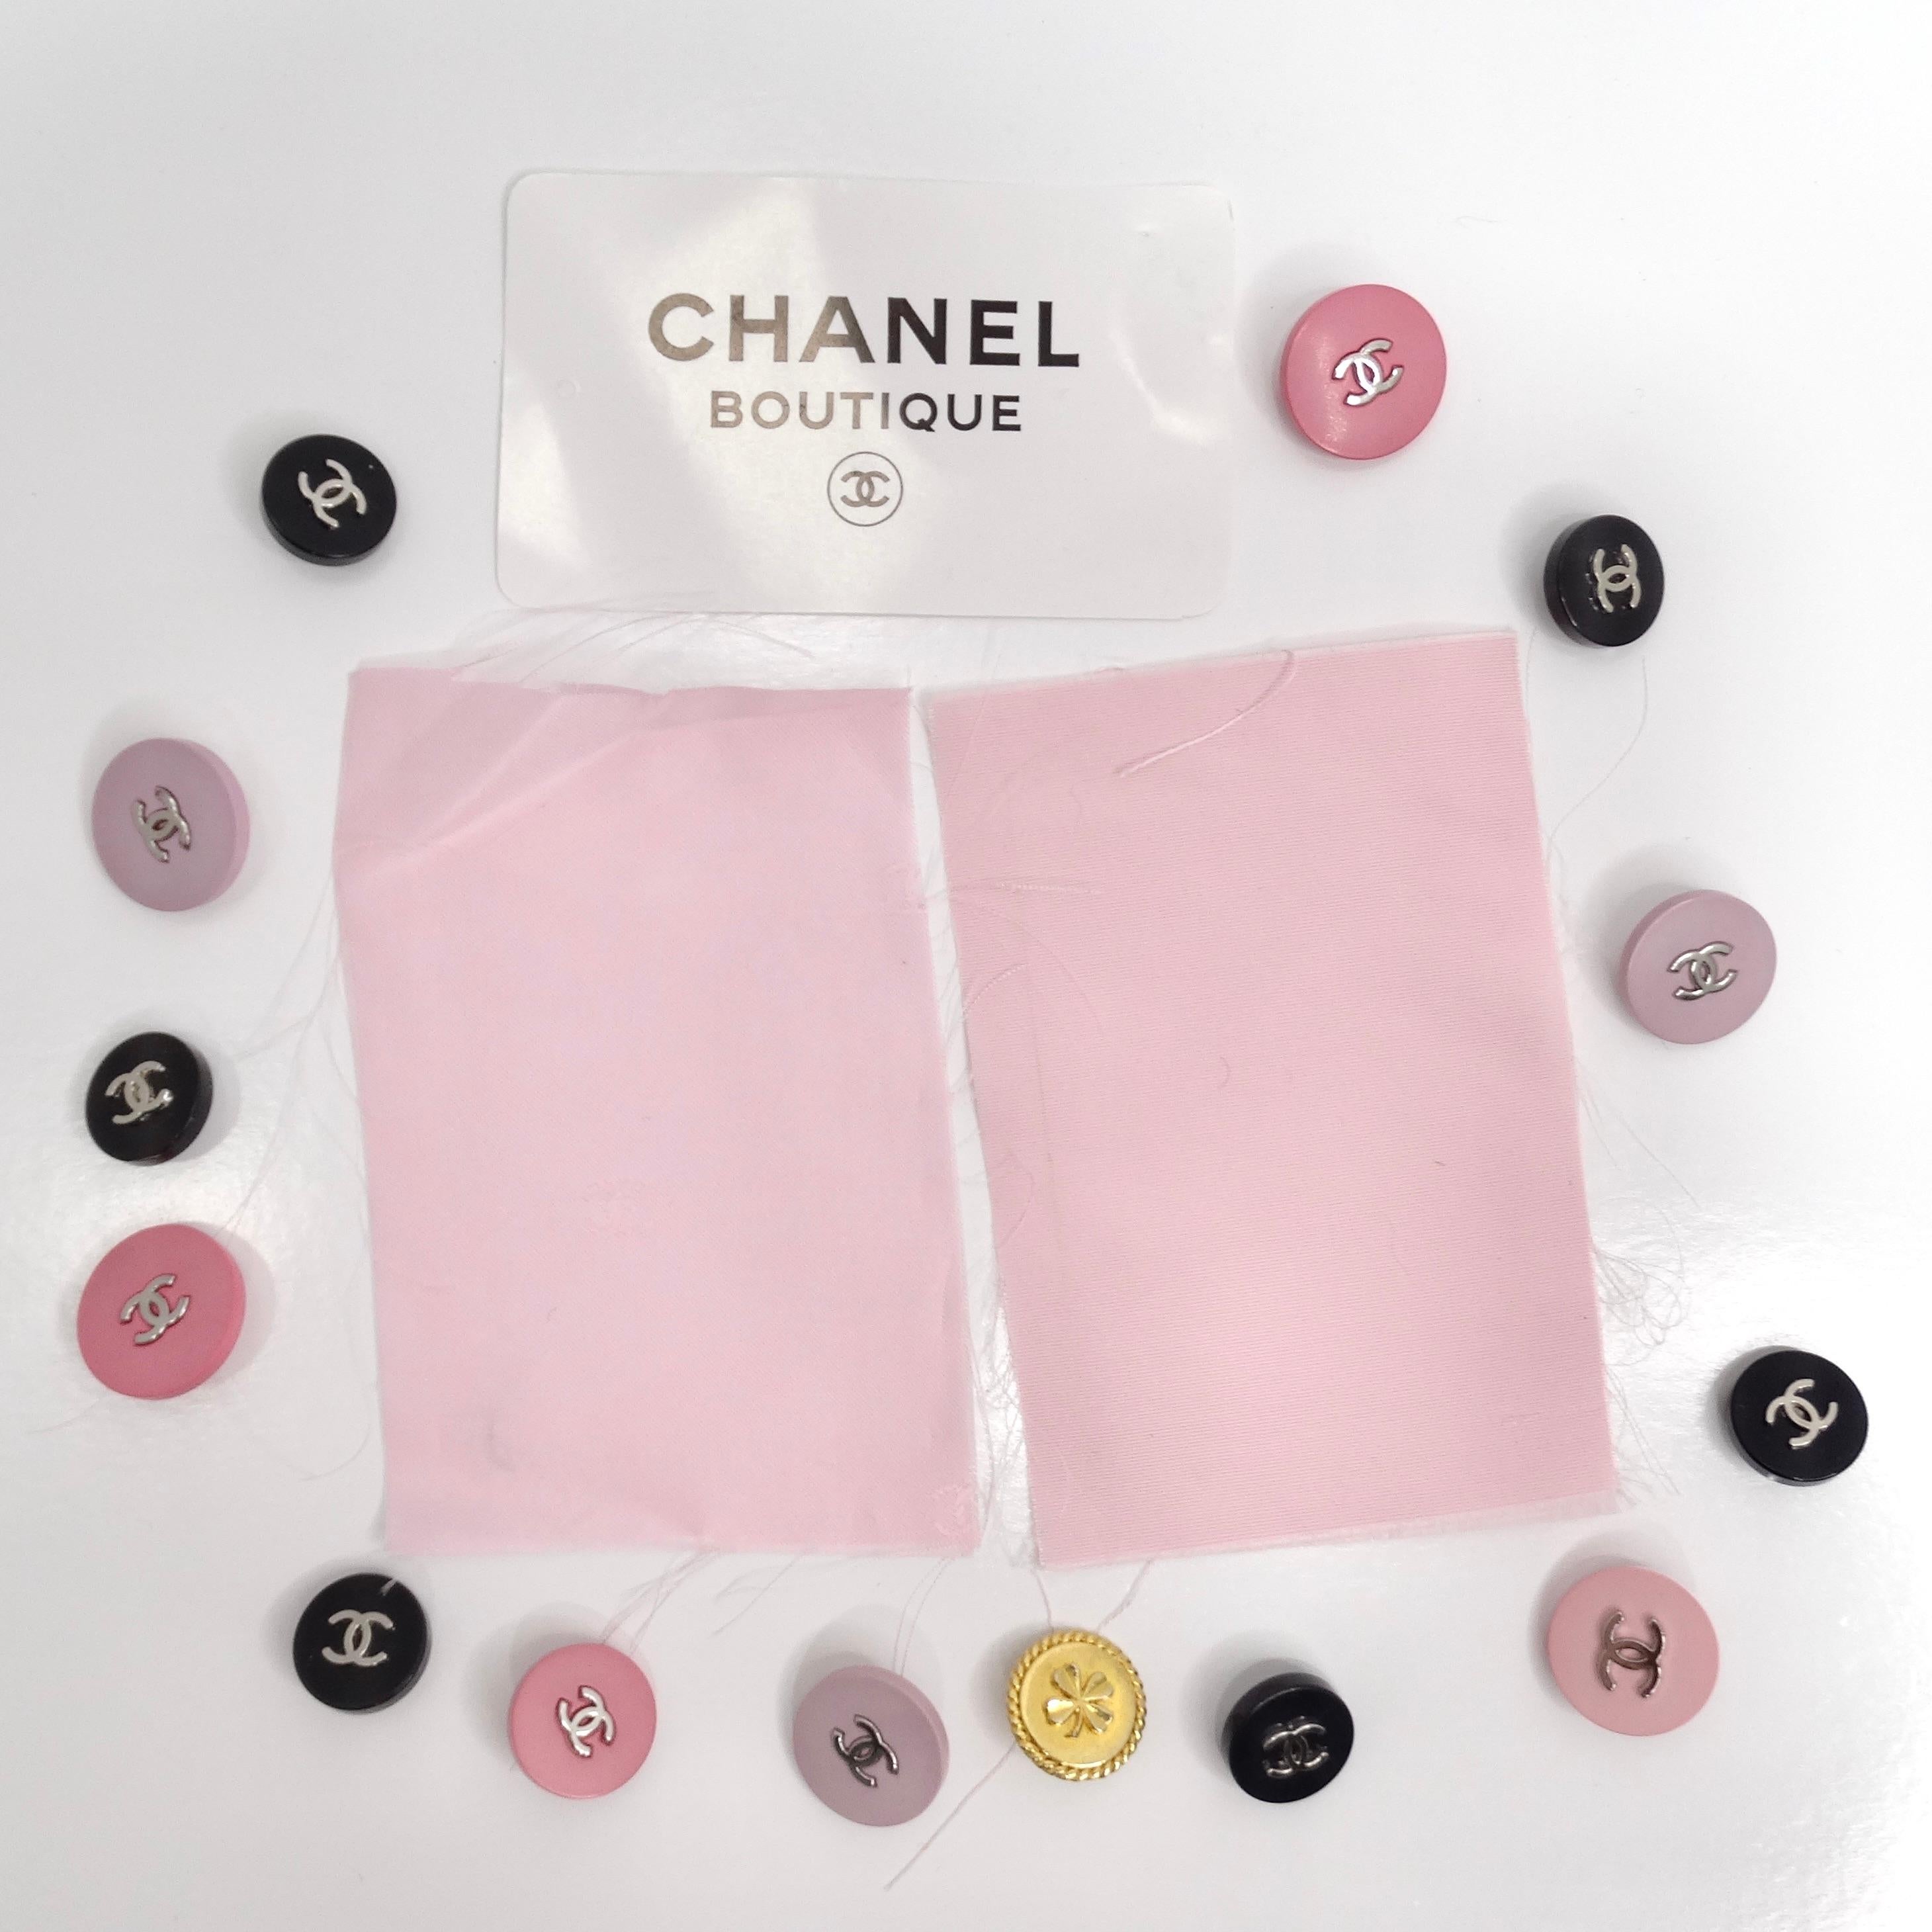 Chanel 1980s and 90s Set Of 21 Buttons 1